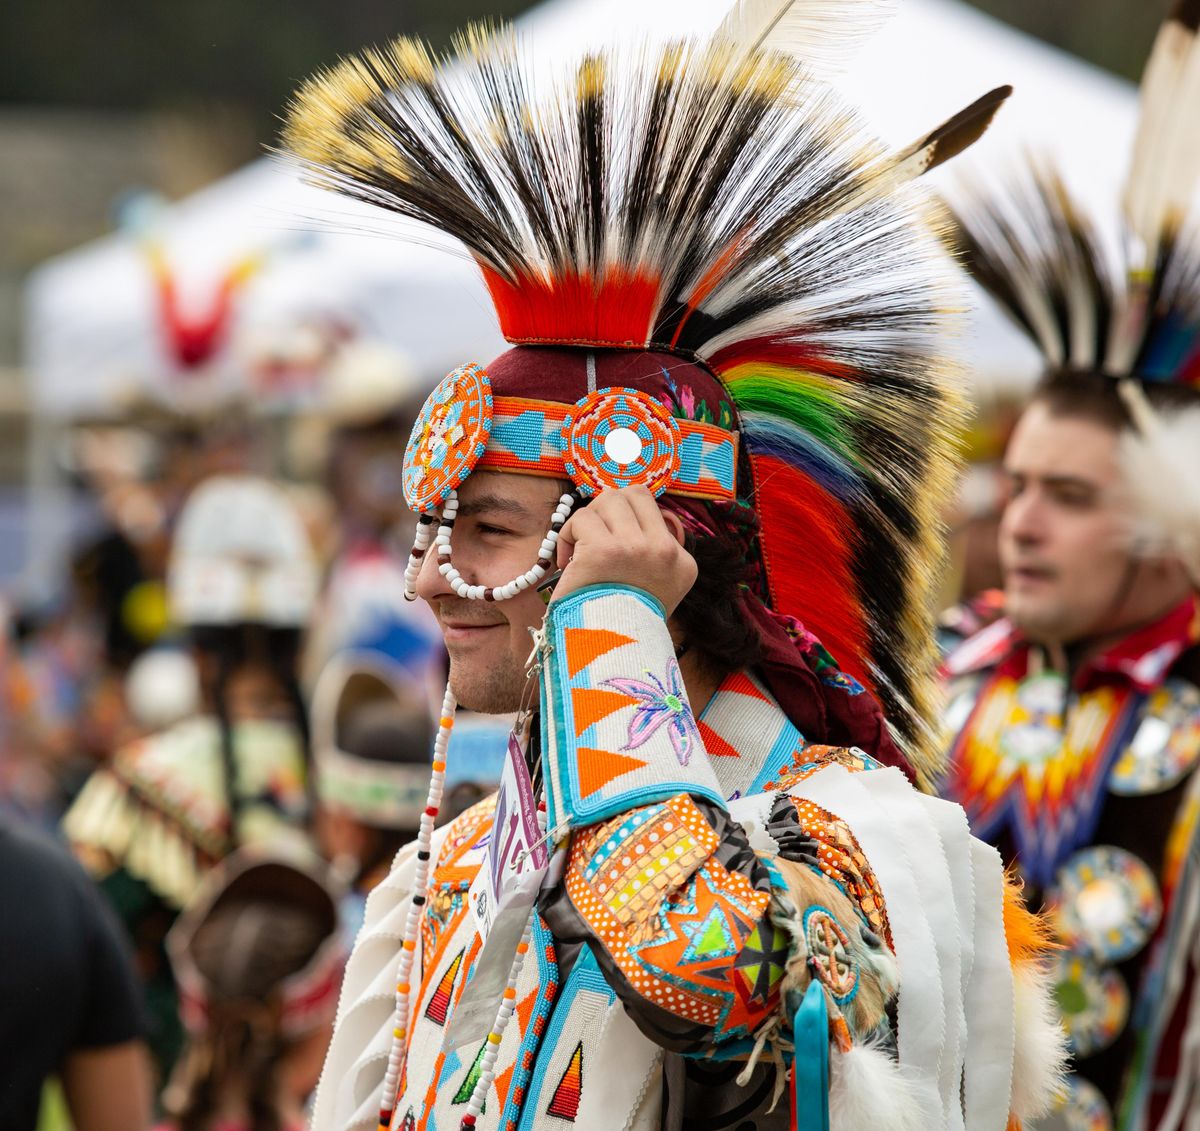 Alec Bluff smiles while dancing at the Gathering at the Falls powwow in Riverfront Park